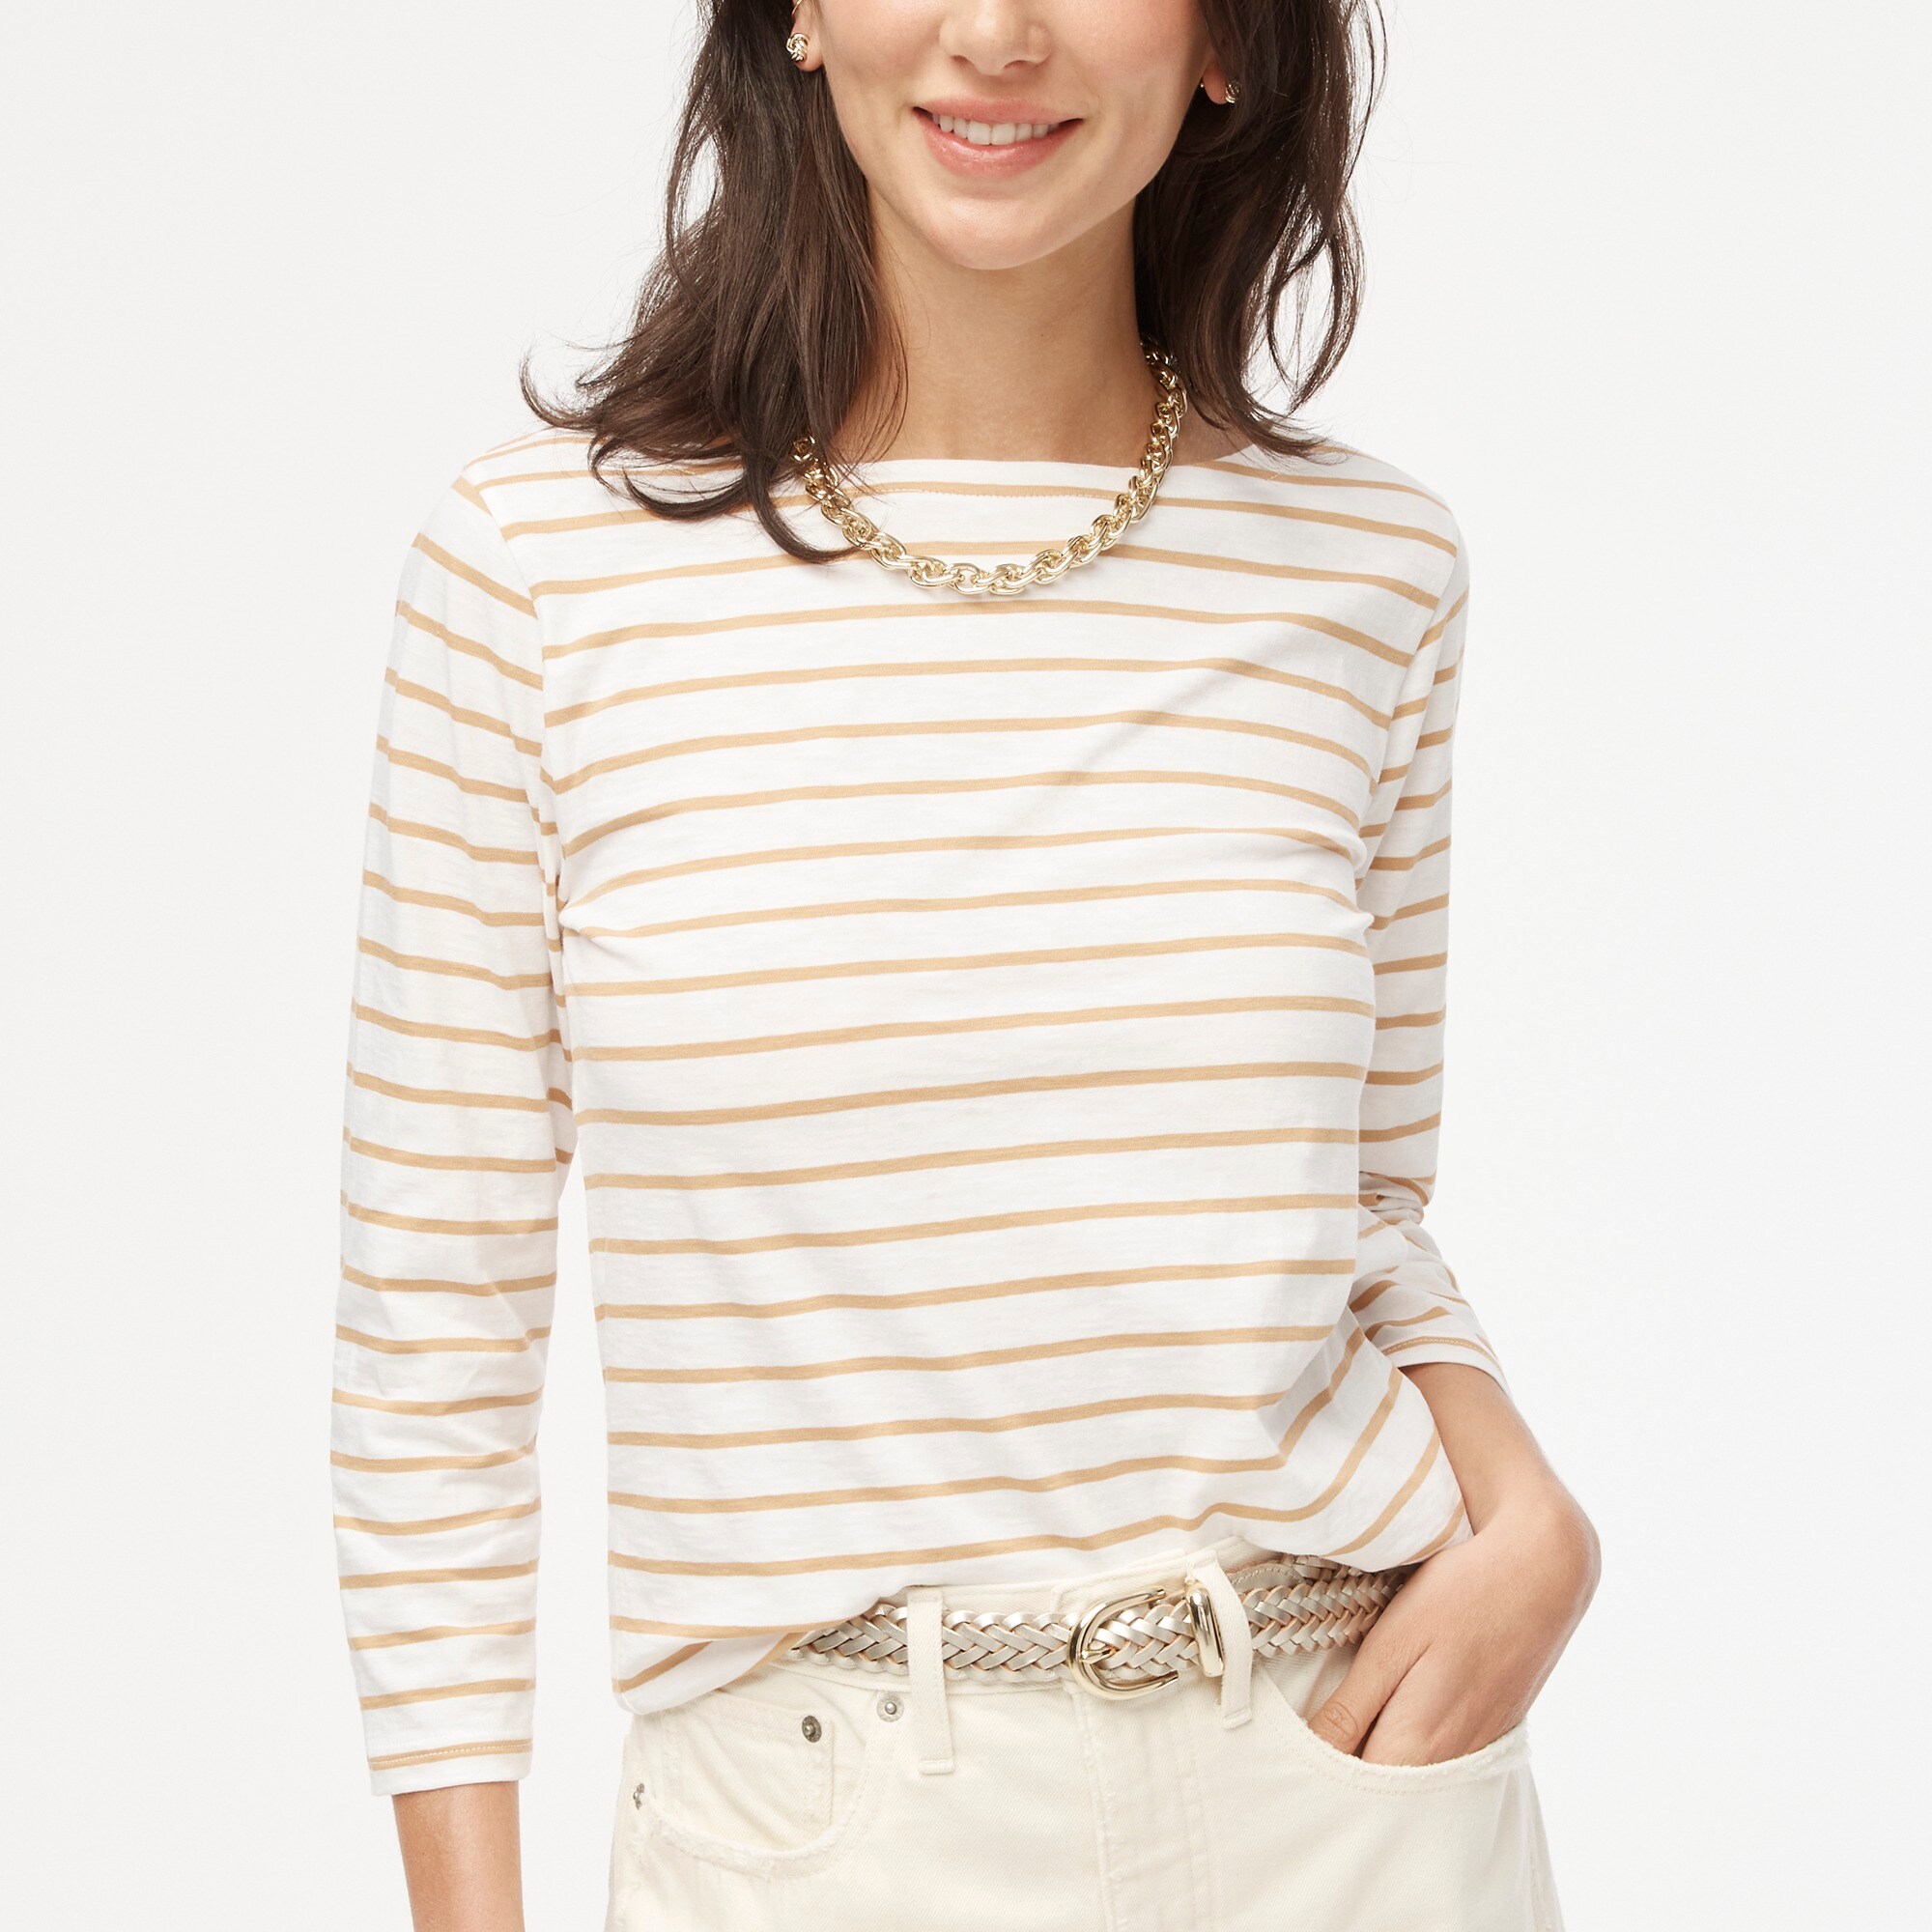  Striped boatneck tee